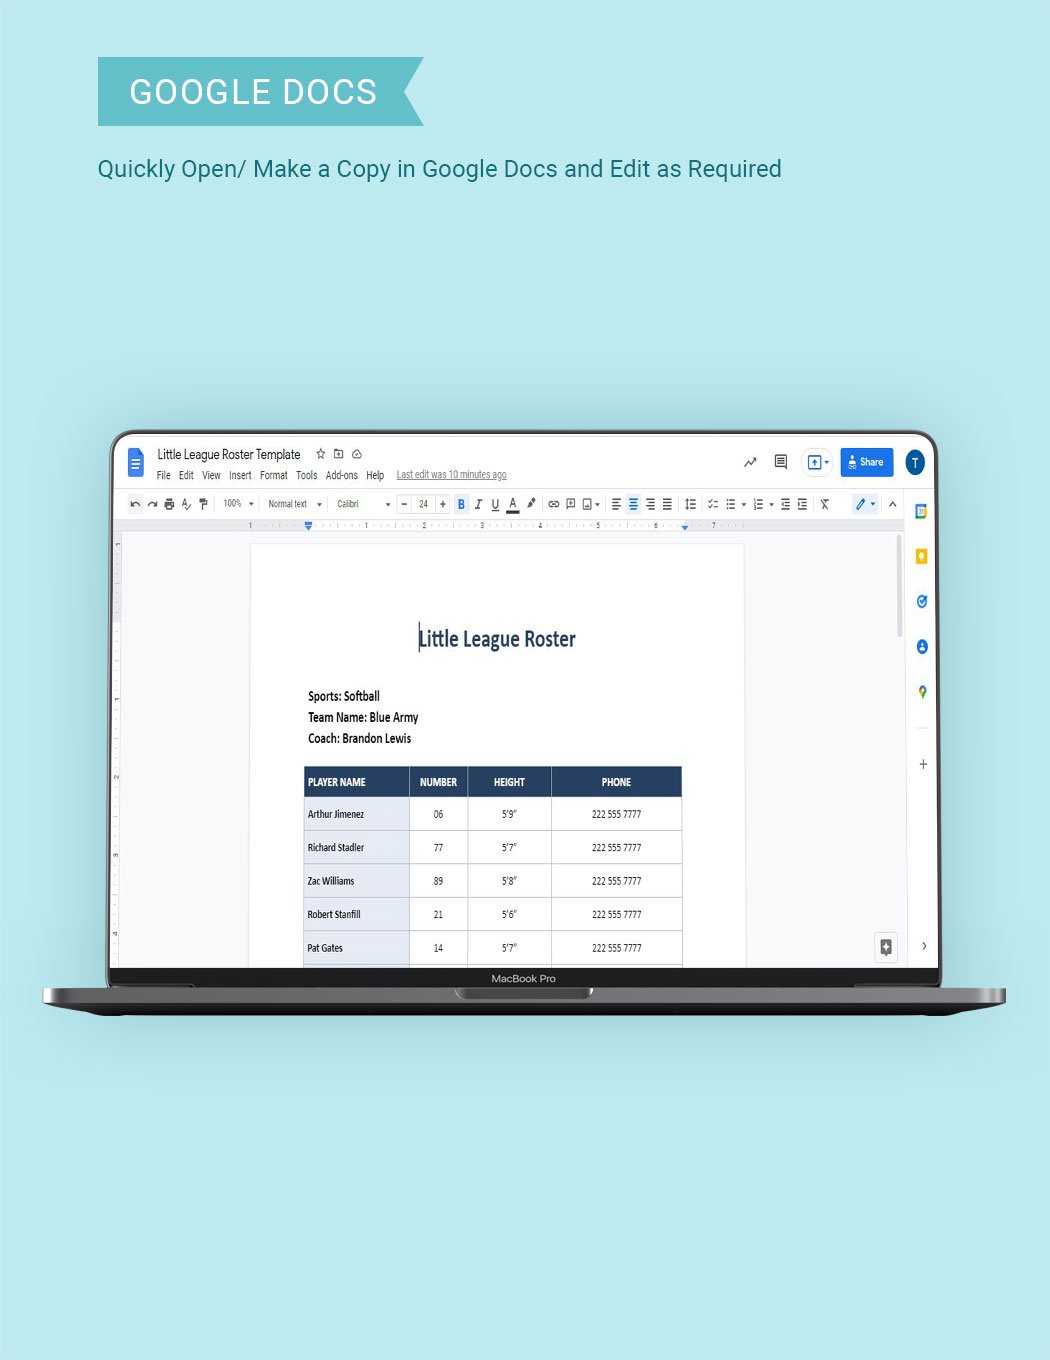 Little League Roster Template in Google Docs Word Download